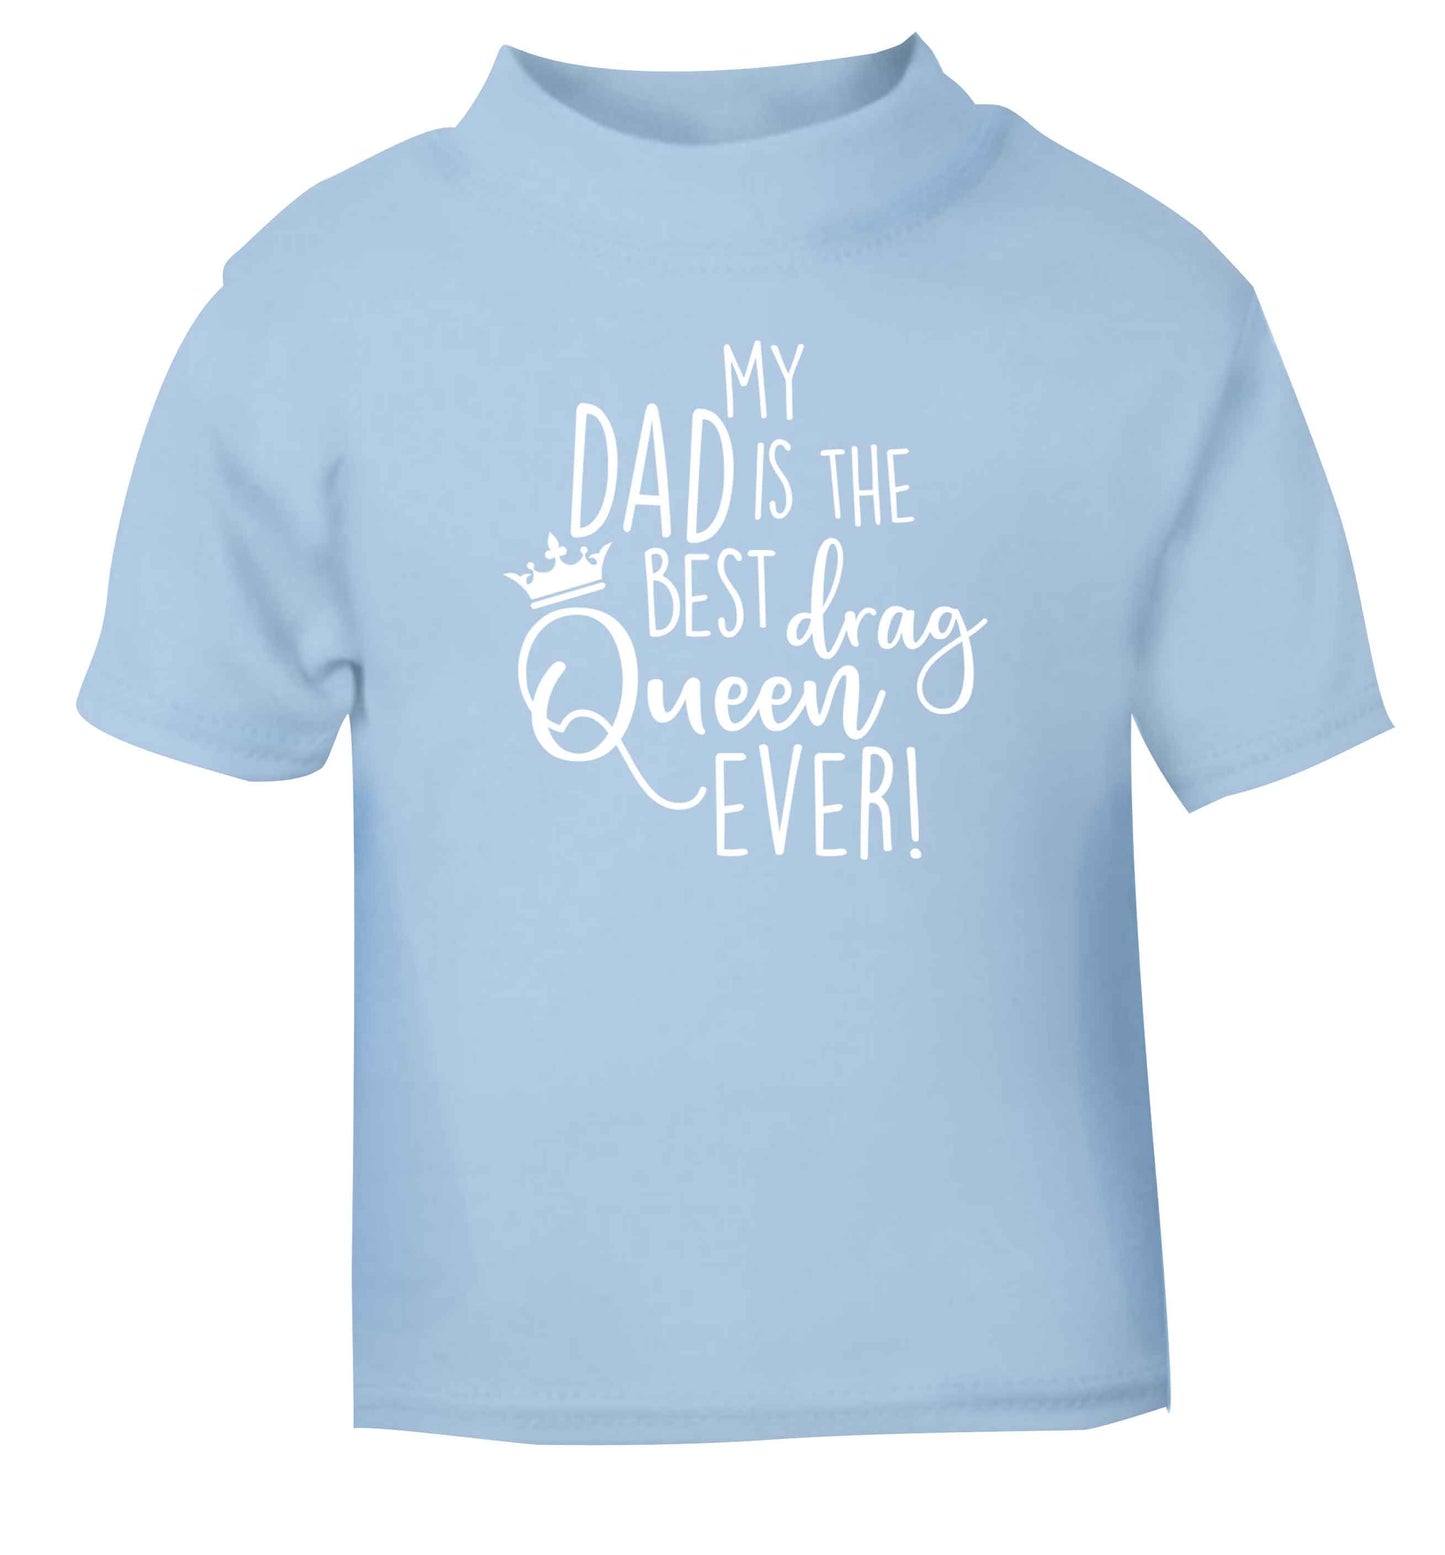 My dad is the best drag Queen ever light blue Baby Toddler Tshirt 2 Years